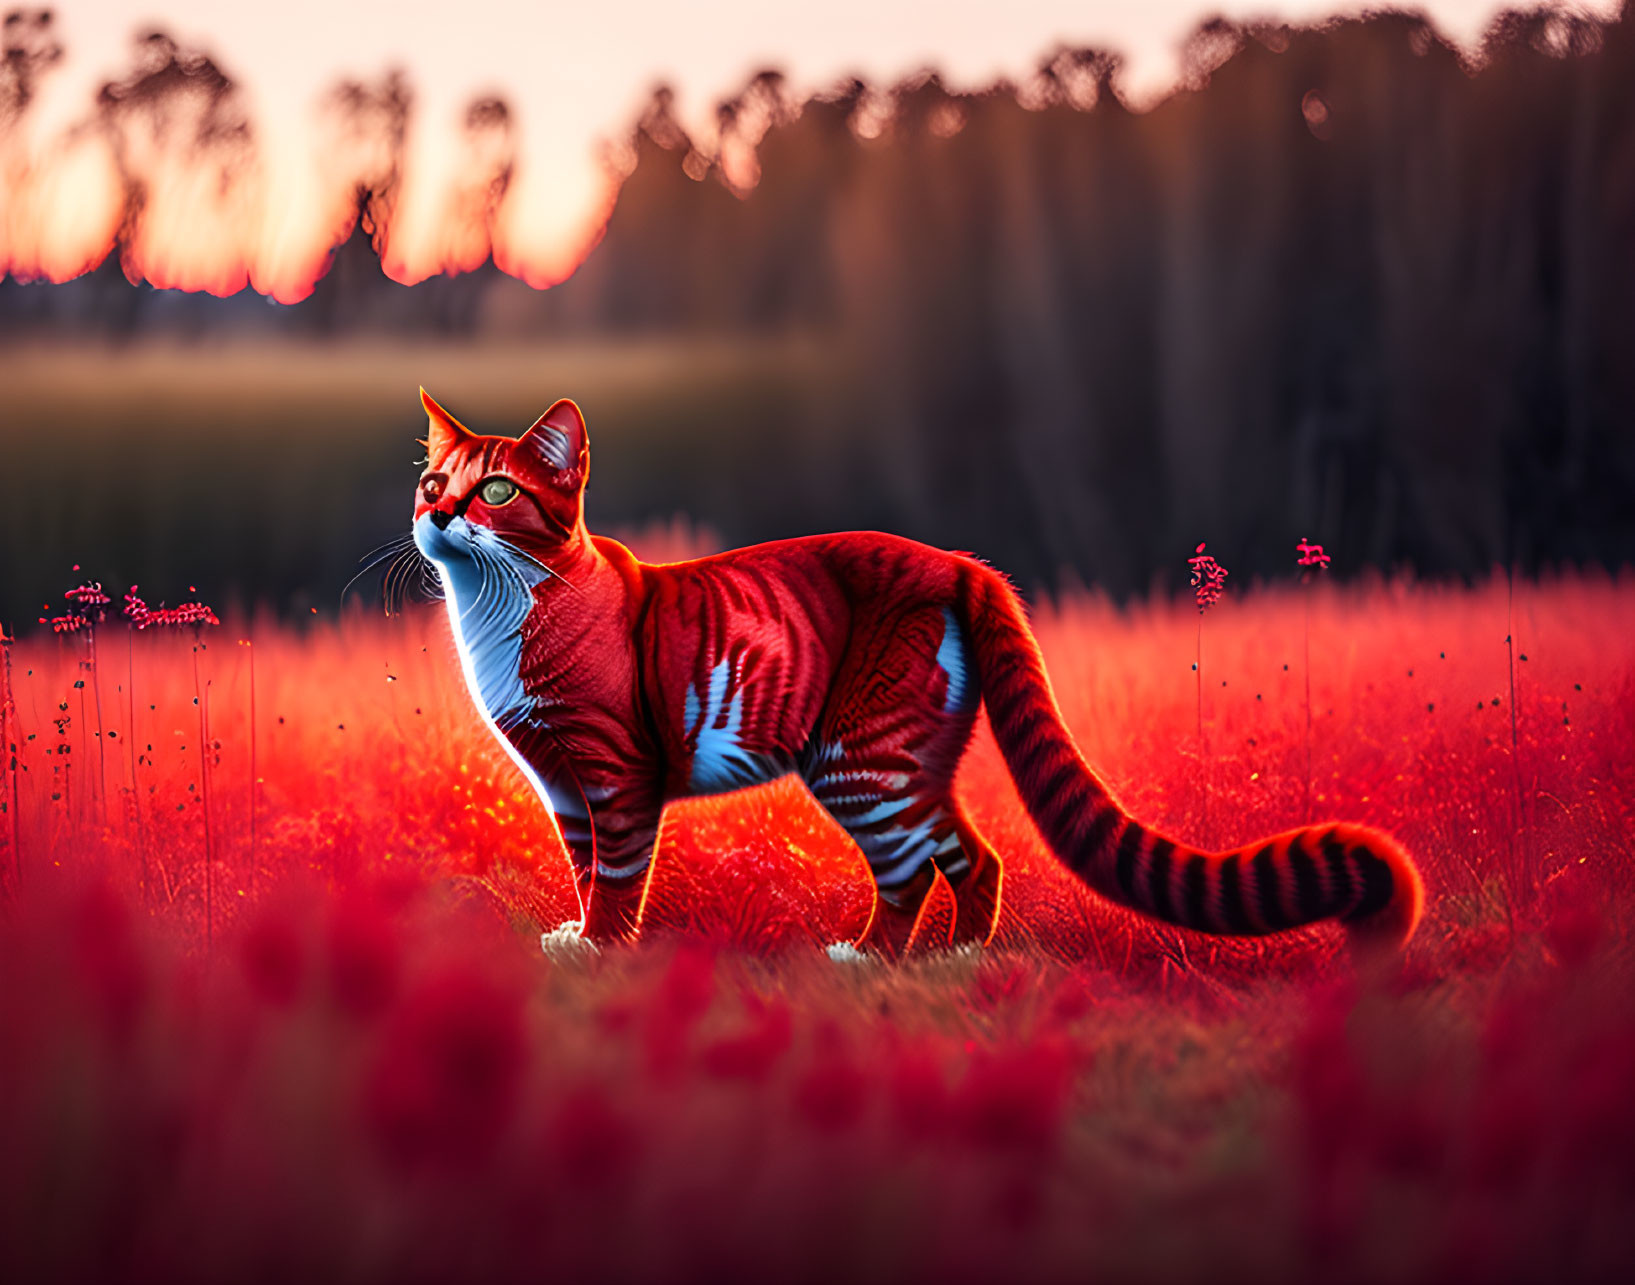 Orange Cat with Striking Stripes in Red Flower Field at Sunset